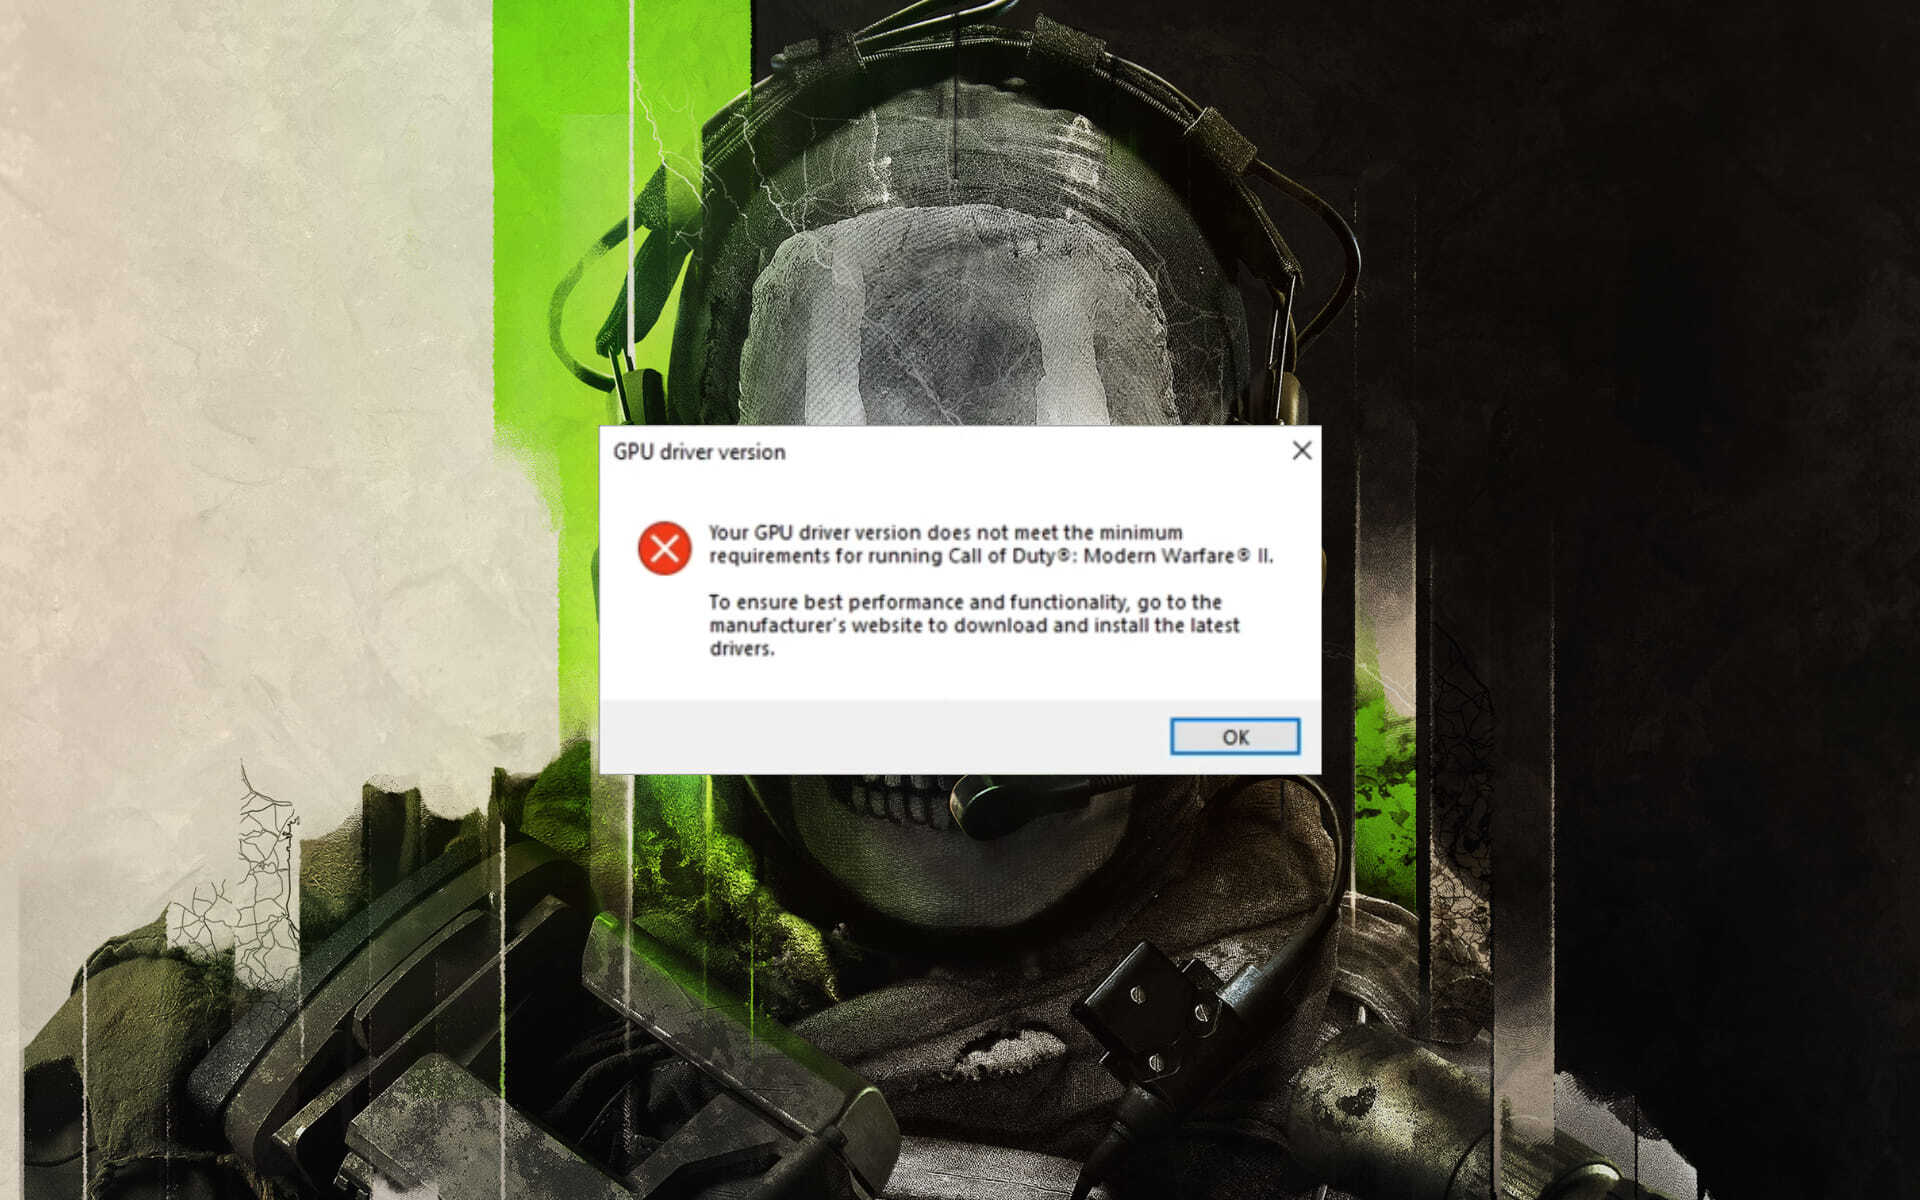 Outdated game version: Make sure that you have the latest updates and patches installed for MW2. Developers often release updates to address known issues and improve stability.
Hardware overheating: Overheating can lead to crashes. Ensure that your system is adequately cooled and free from dust buildup.